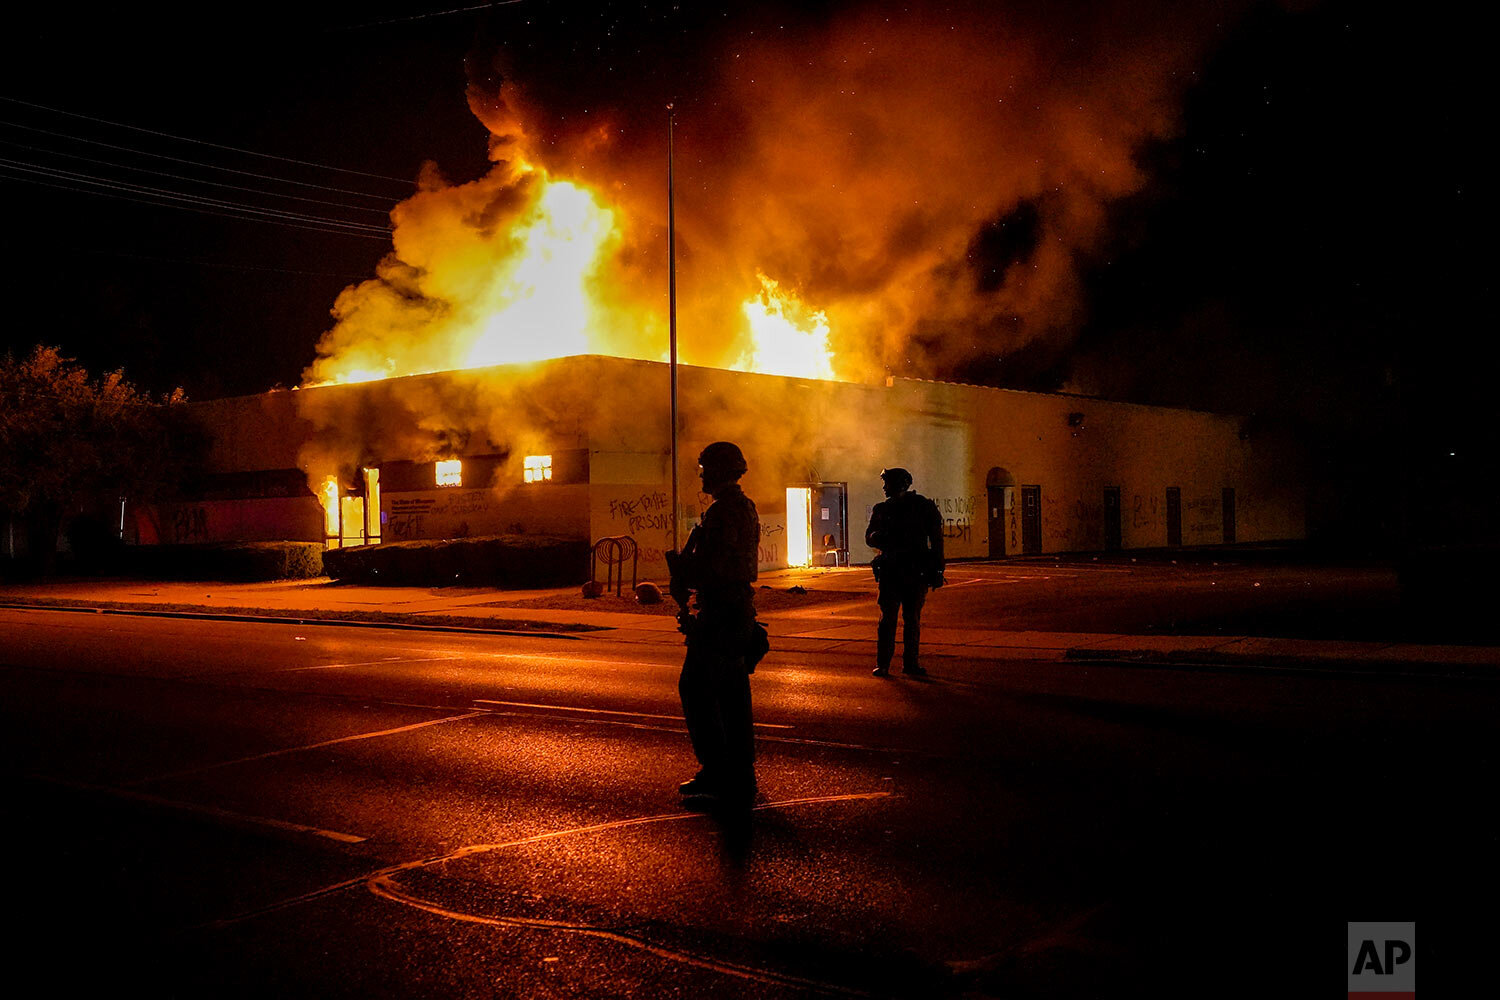  Police stand near a department of corrections building that was on fire during protests, Monday, Aug. 24, 2020, in Kenosha, Wis., sparked by the shooting of Jacob Blake by a Kenosha Police officer a day earlier. (AP Photo/Morry Gash) 